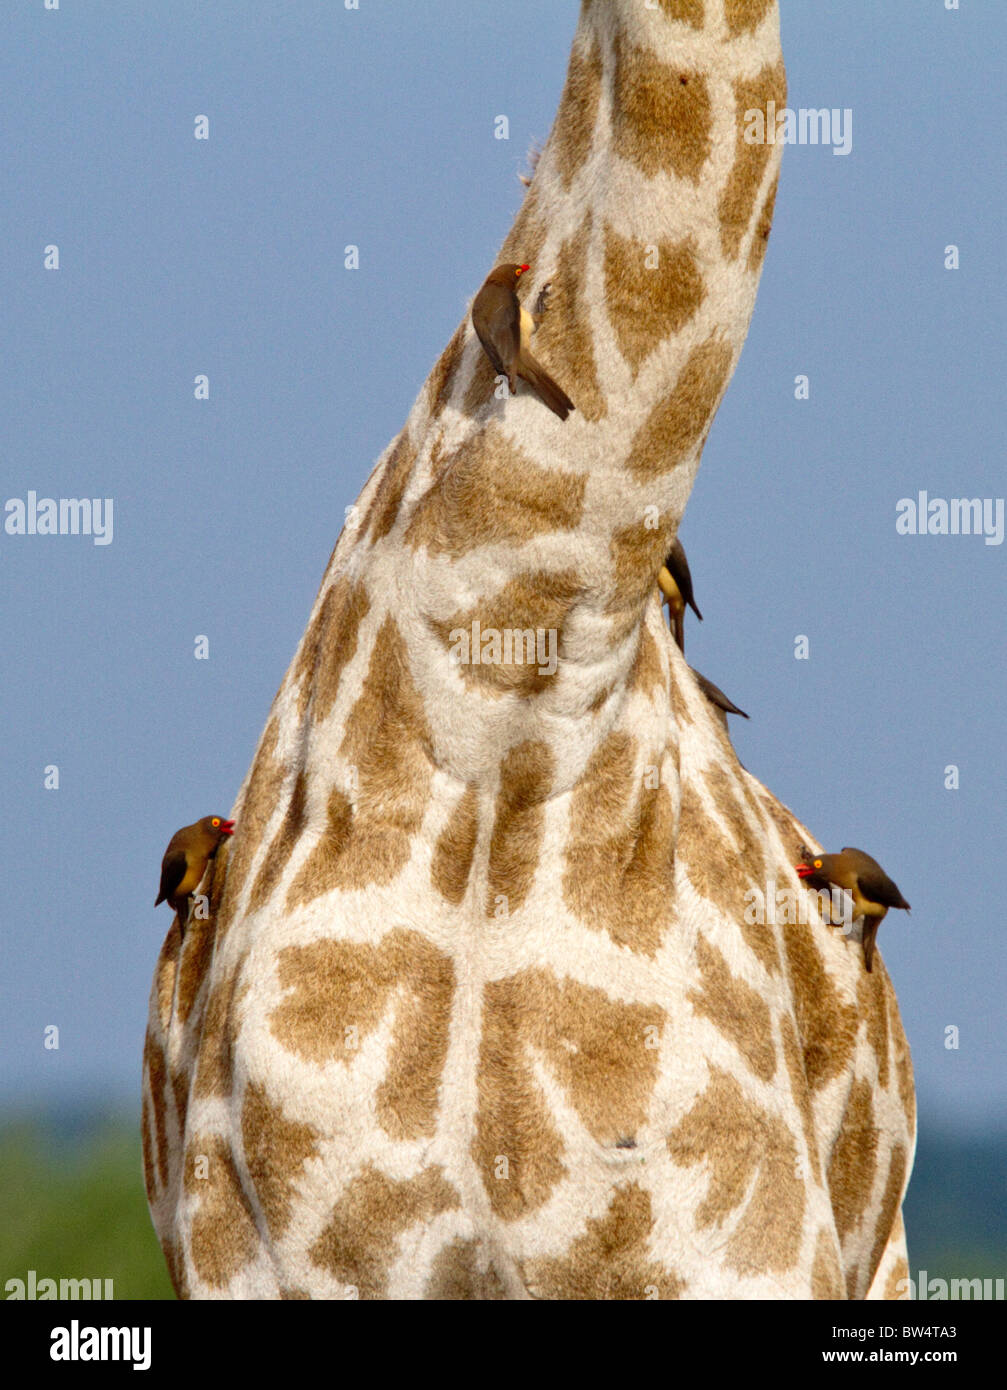 Giraffe (Giraffa camelopardis) with red-billed oxpeckers (Buphagus erythrorhyncus) on its neck Stock Photo